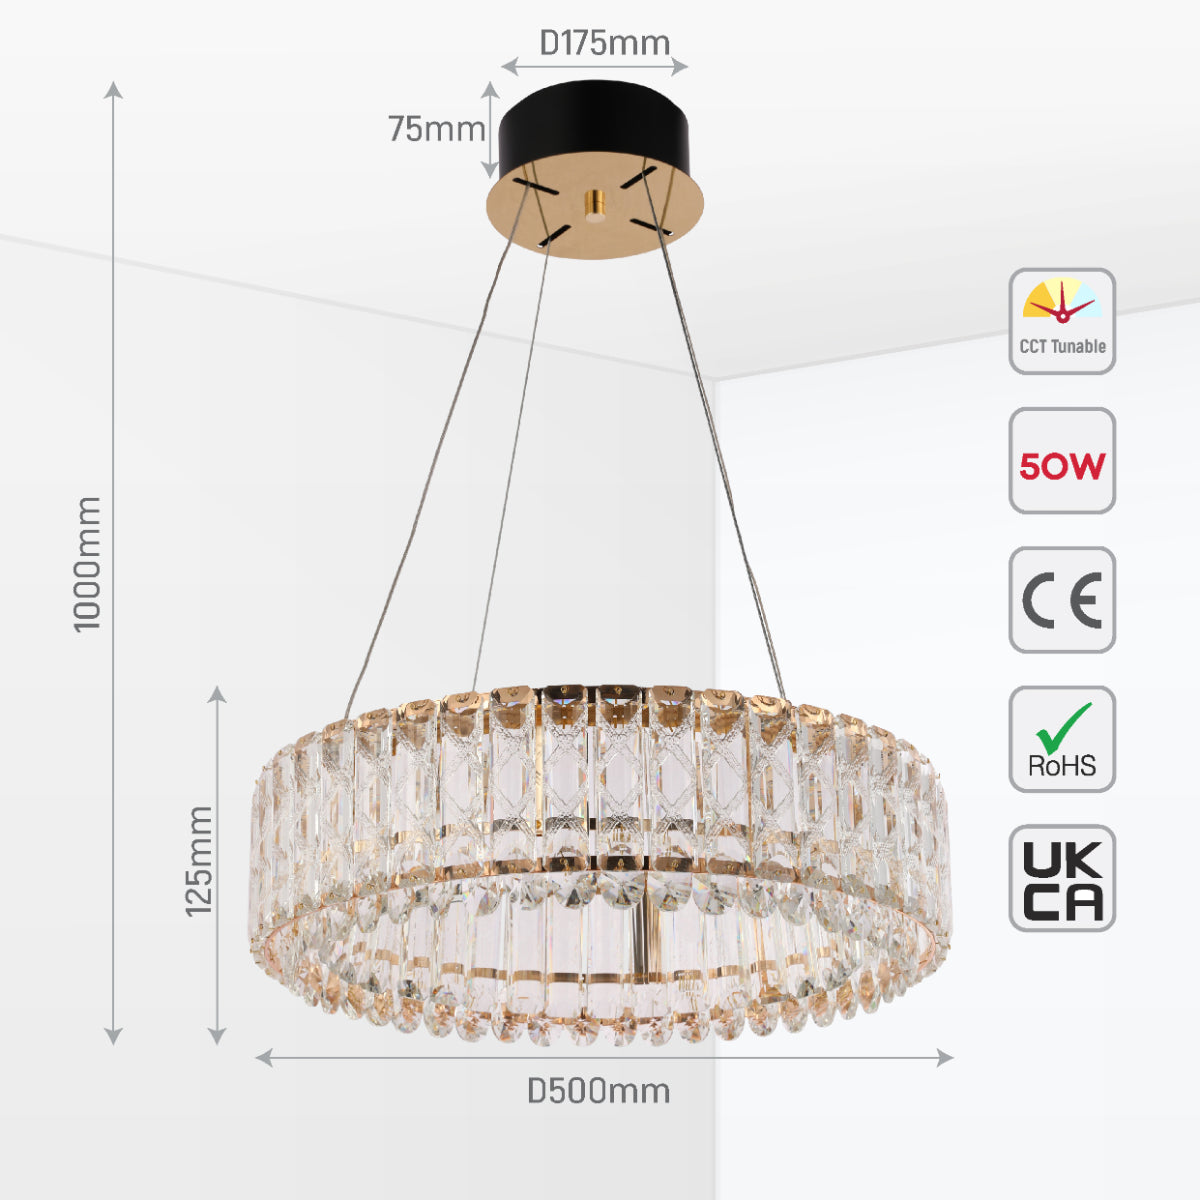 Size and certifications of Crystal Gold Pendant Chandelier Light with Remote Control 159-18215